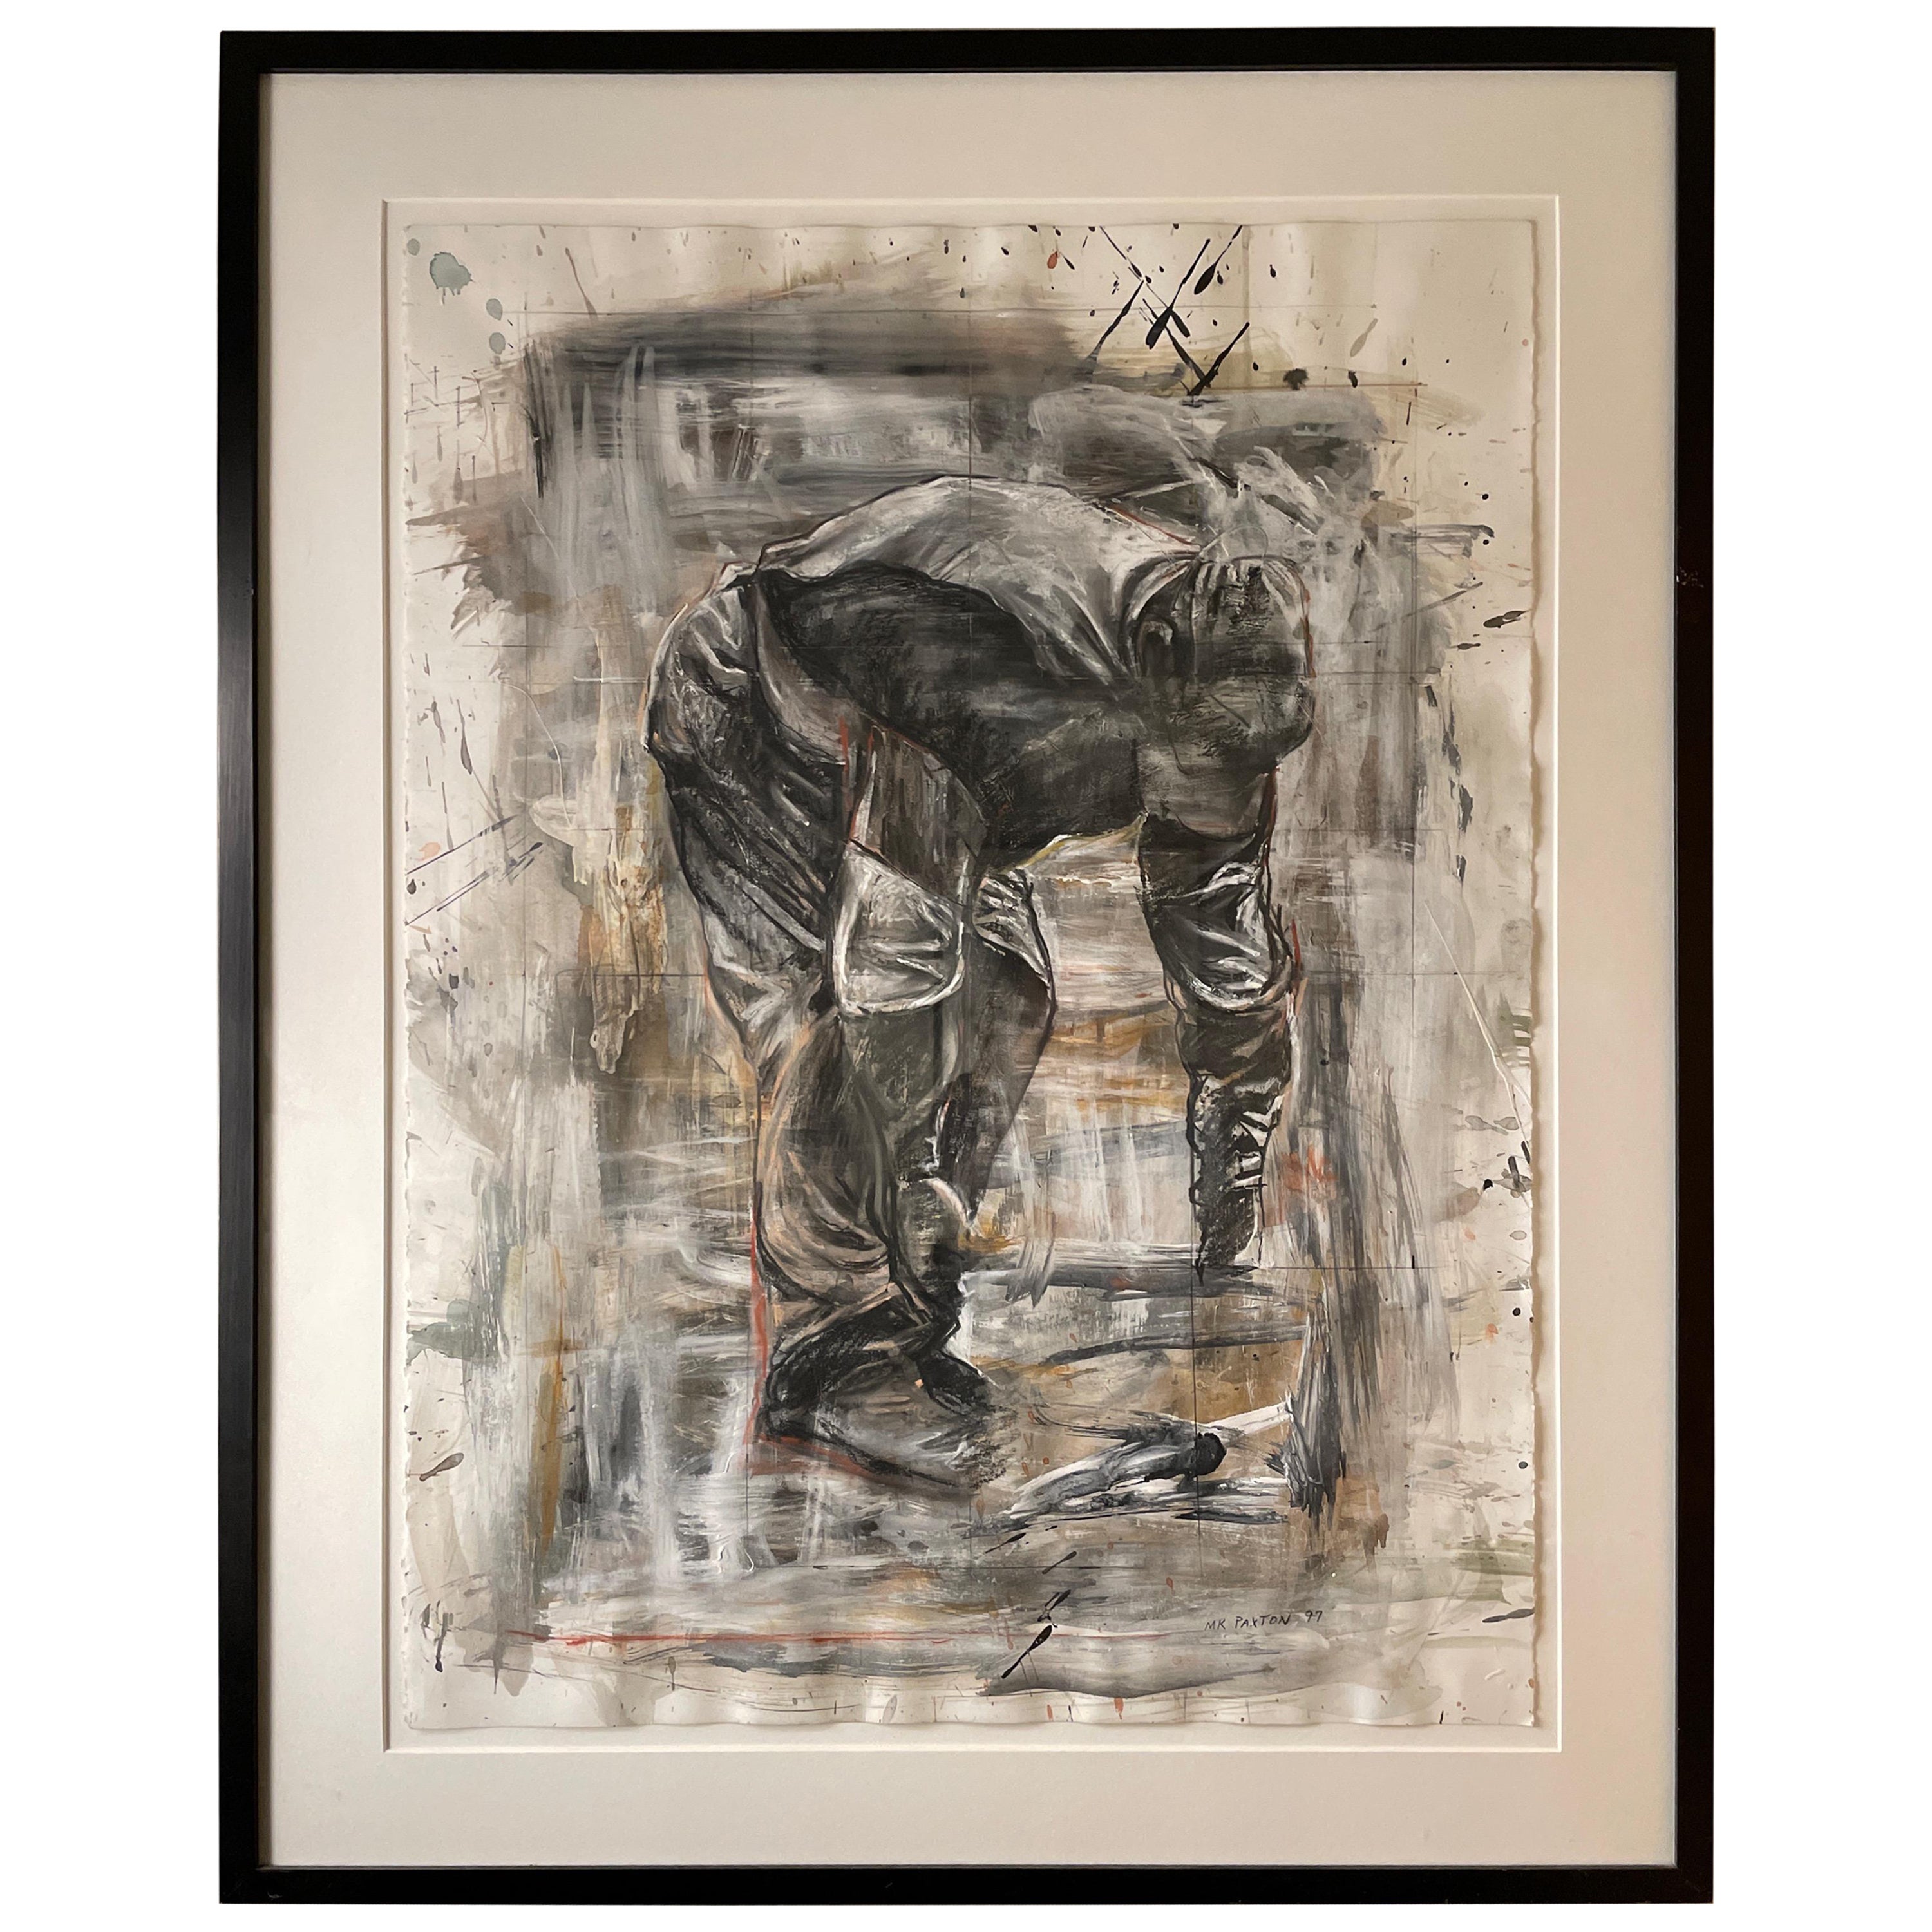 “Worker”, mixed media art by Michael K Paxton